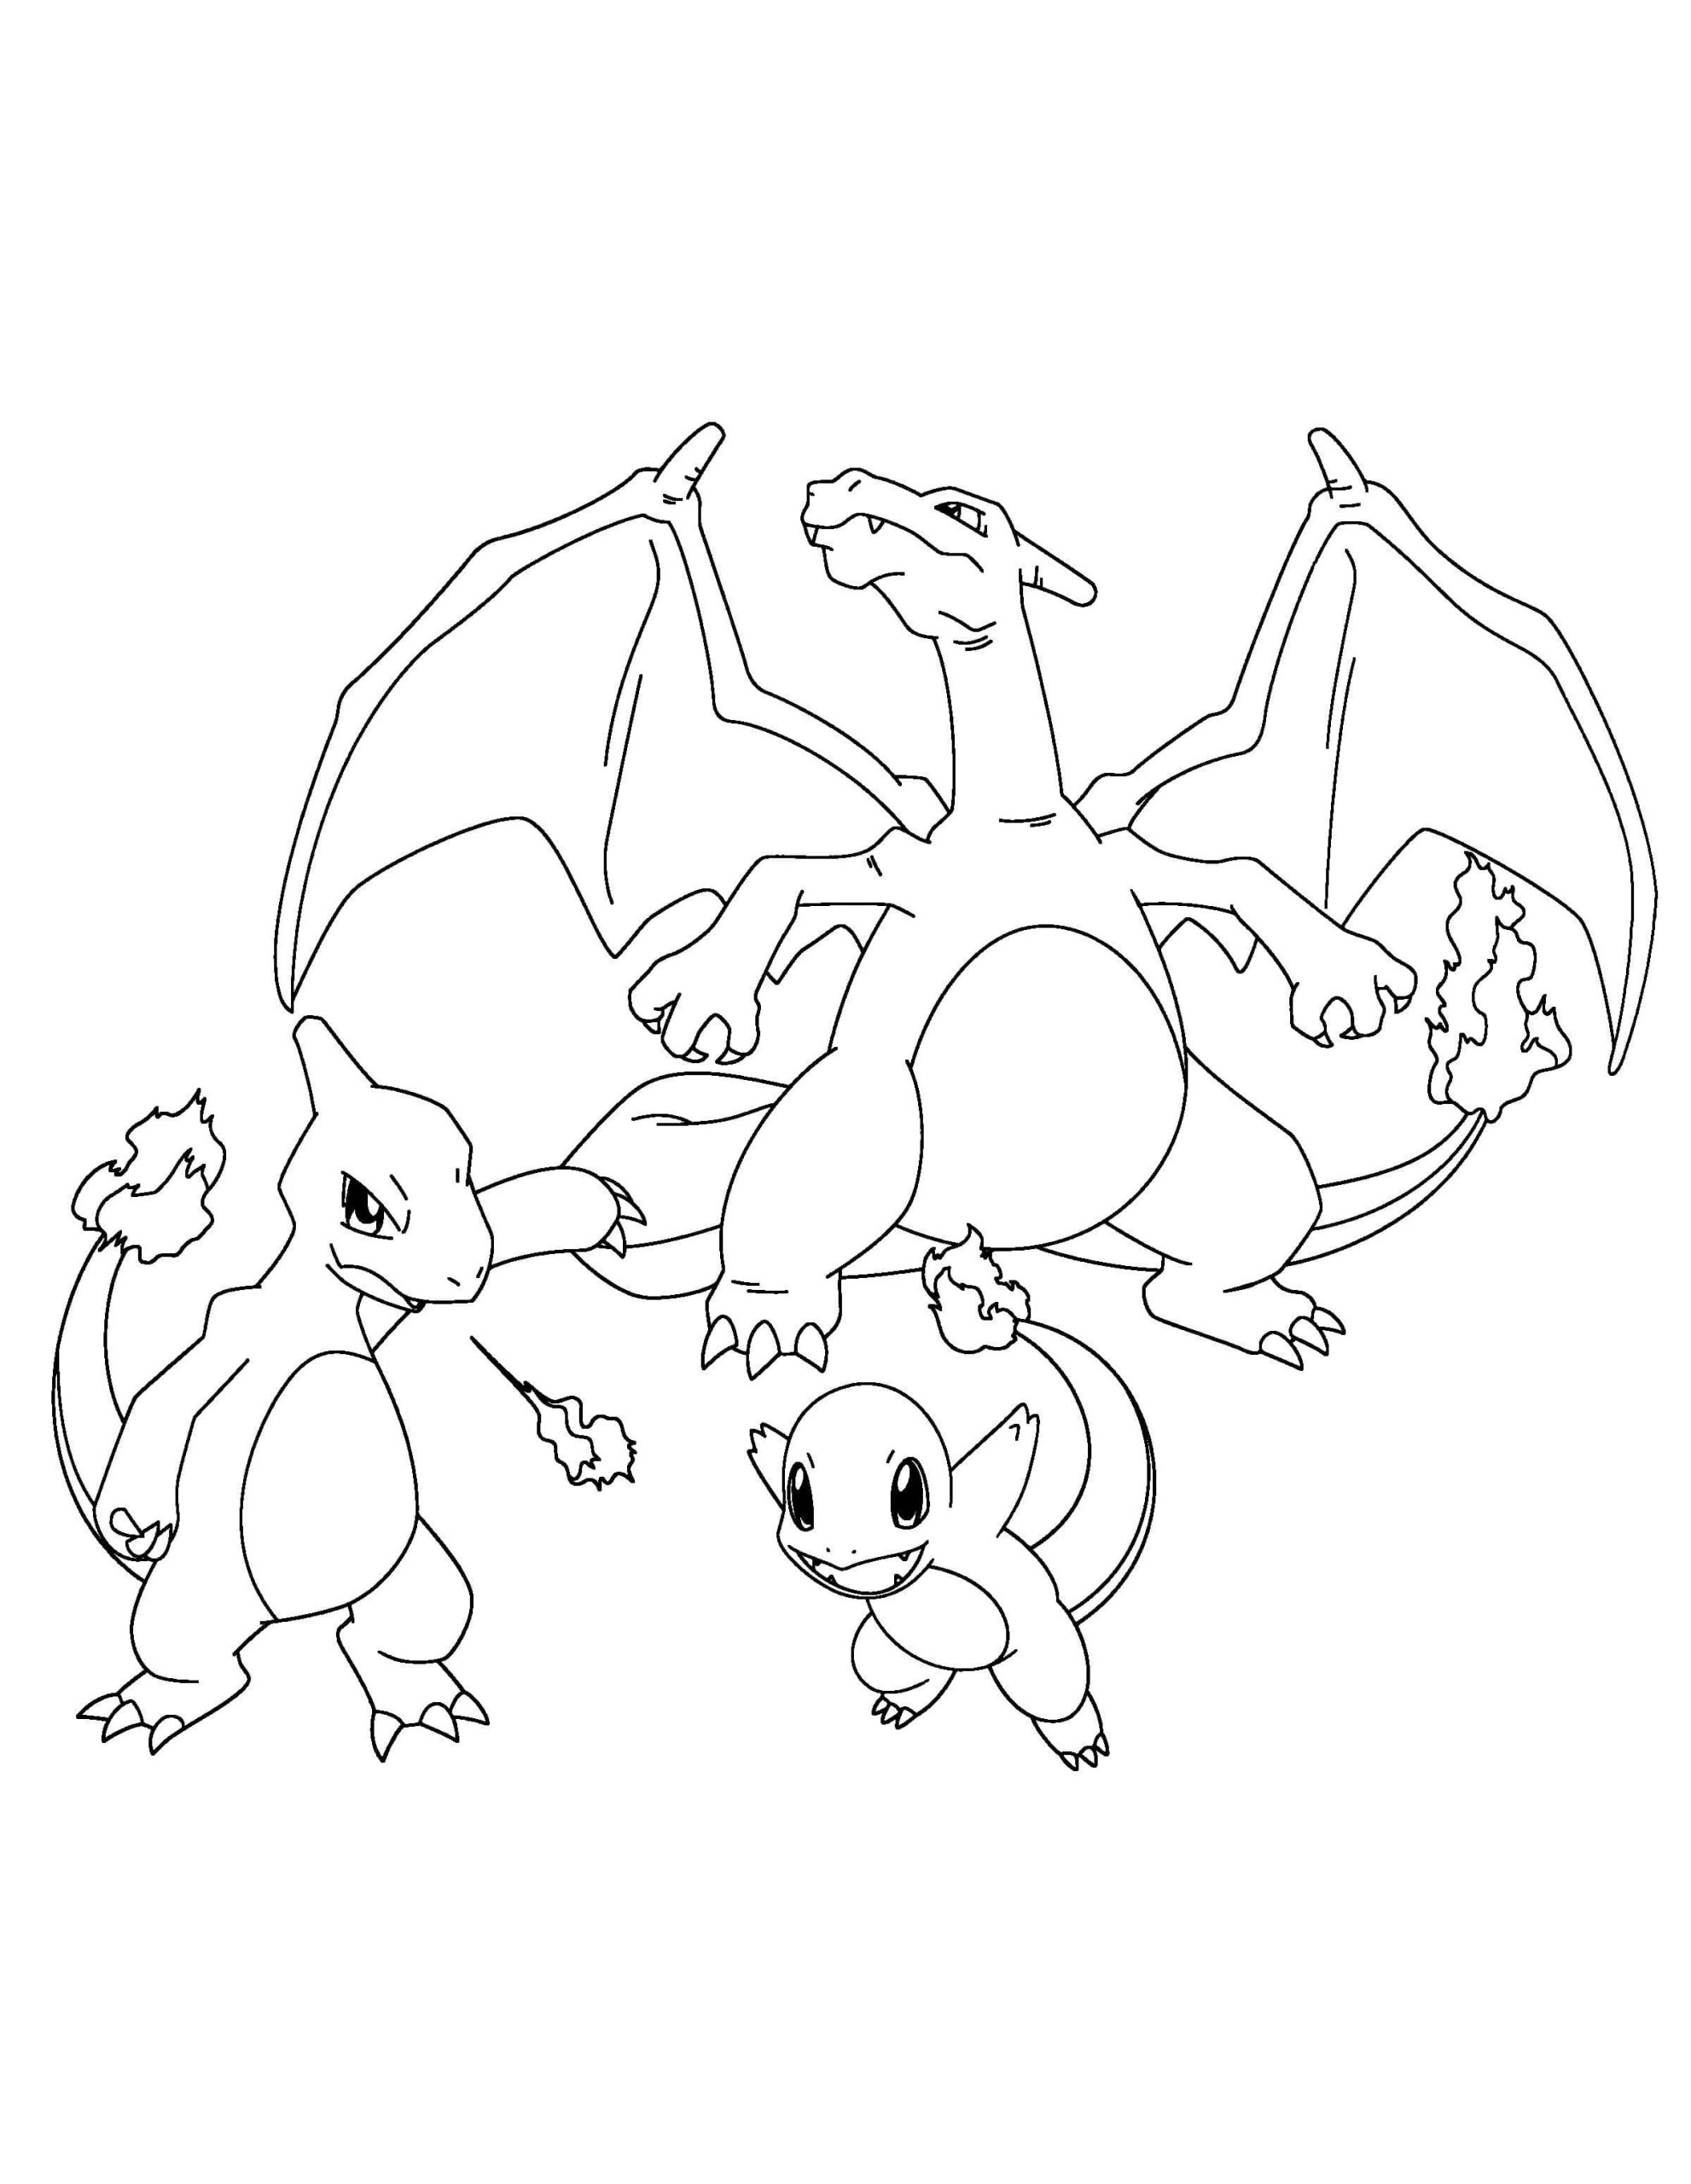 All Stages Of The Evolution Of Pokemon Charmander Coloring Page